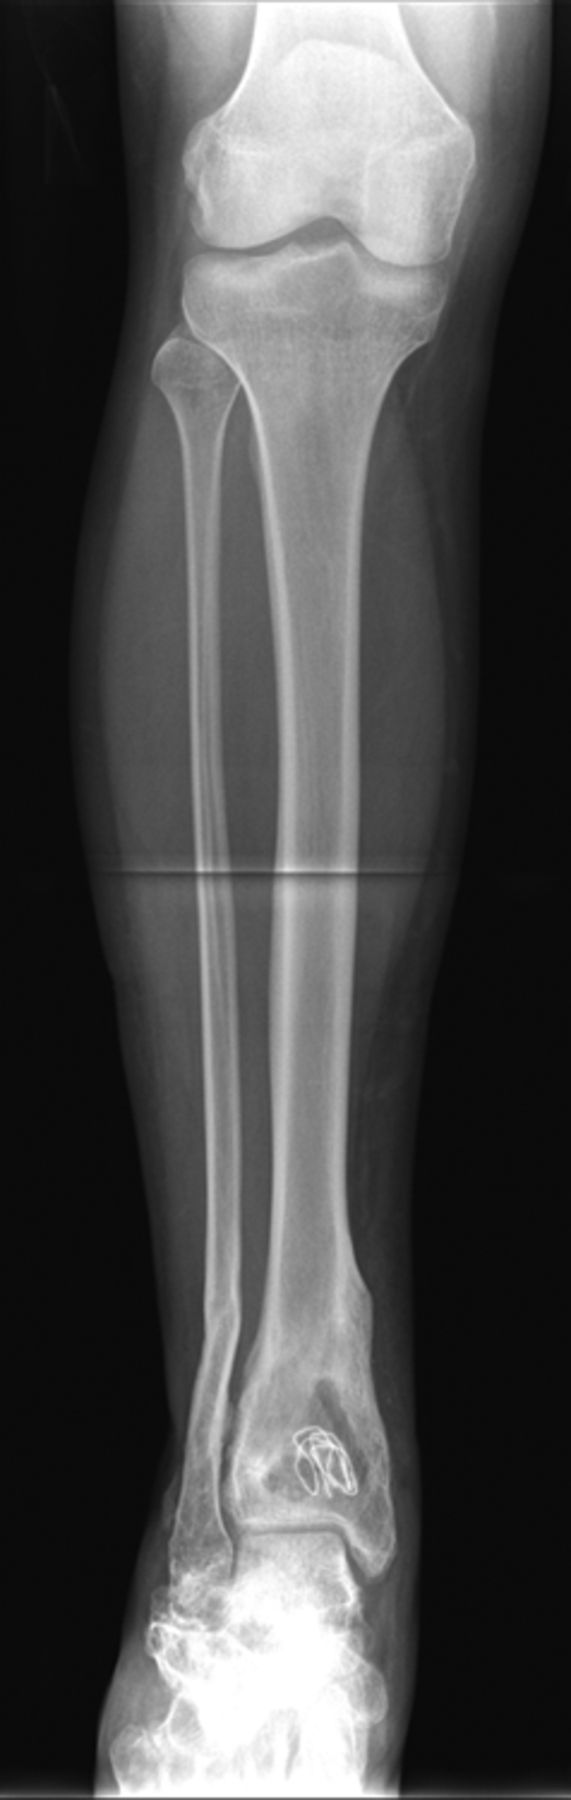 Figs. 5a - 5d 
            Radiographs showing HERAFILL®
beads G (Heraeus Medical GmbH) after implantation into a distal
tibial bone void a) pre-operatively, b) post-operatively, c) three
and d) six months post-operatively.
          